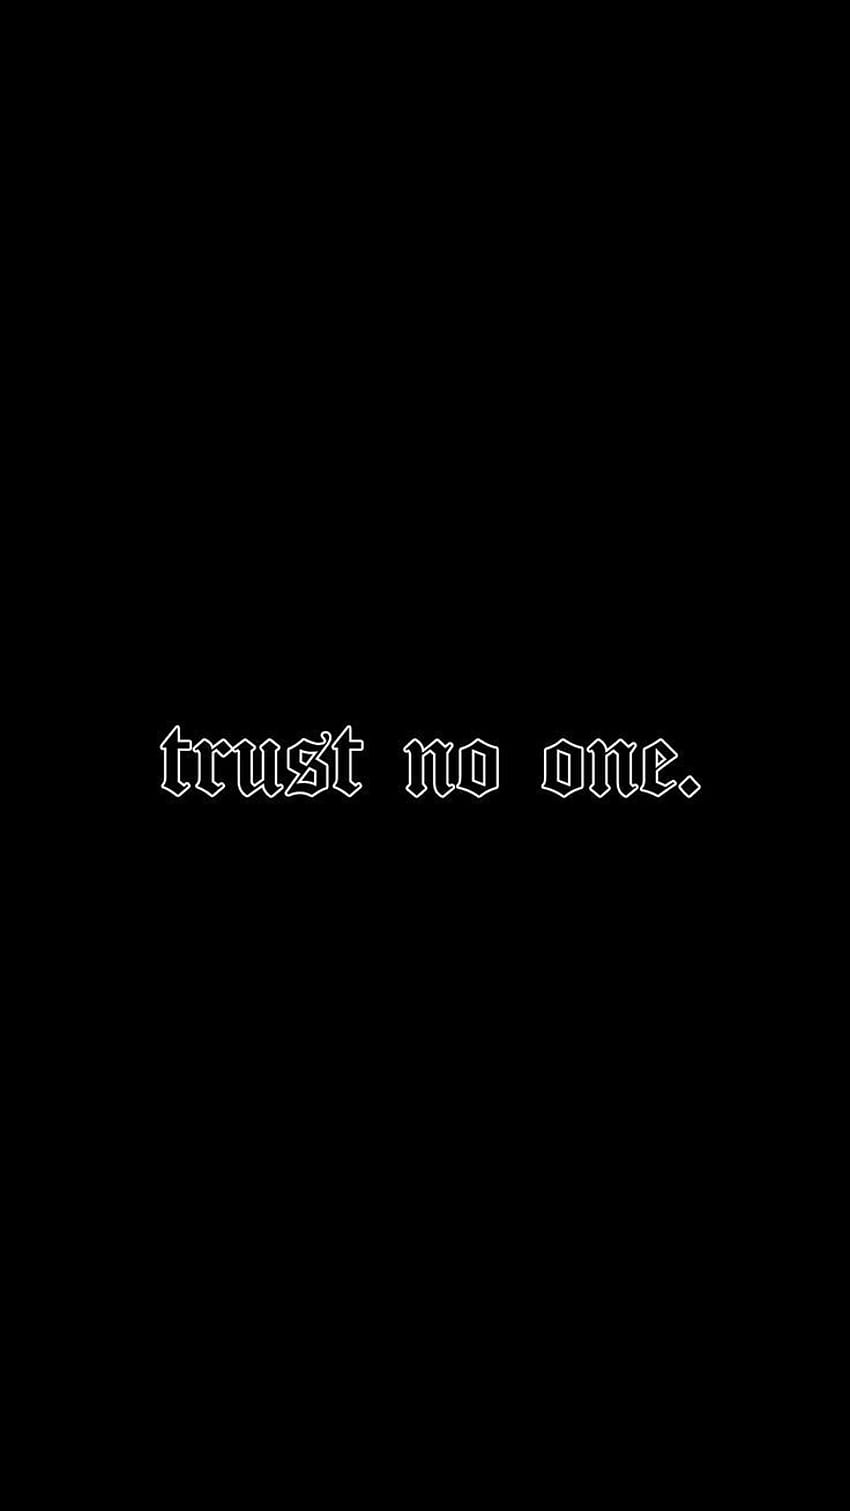 100 Most Popular Trust No One Quotes  Sayings and Images  Hand tattoos  Old school tattoo Trust no one quotes